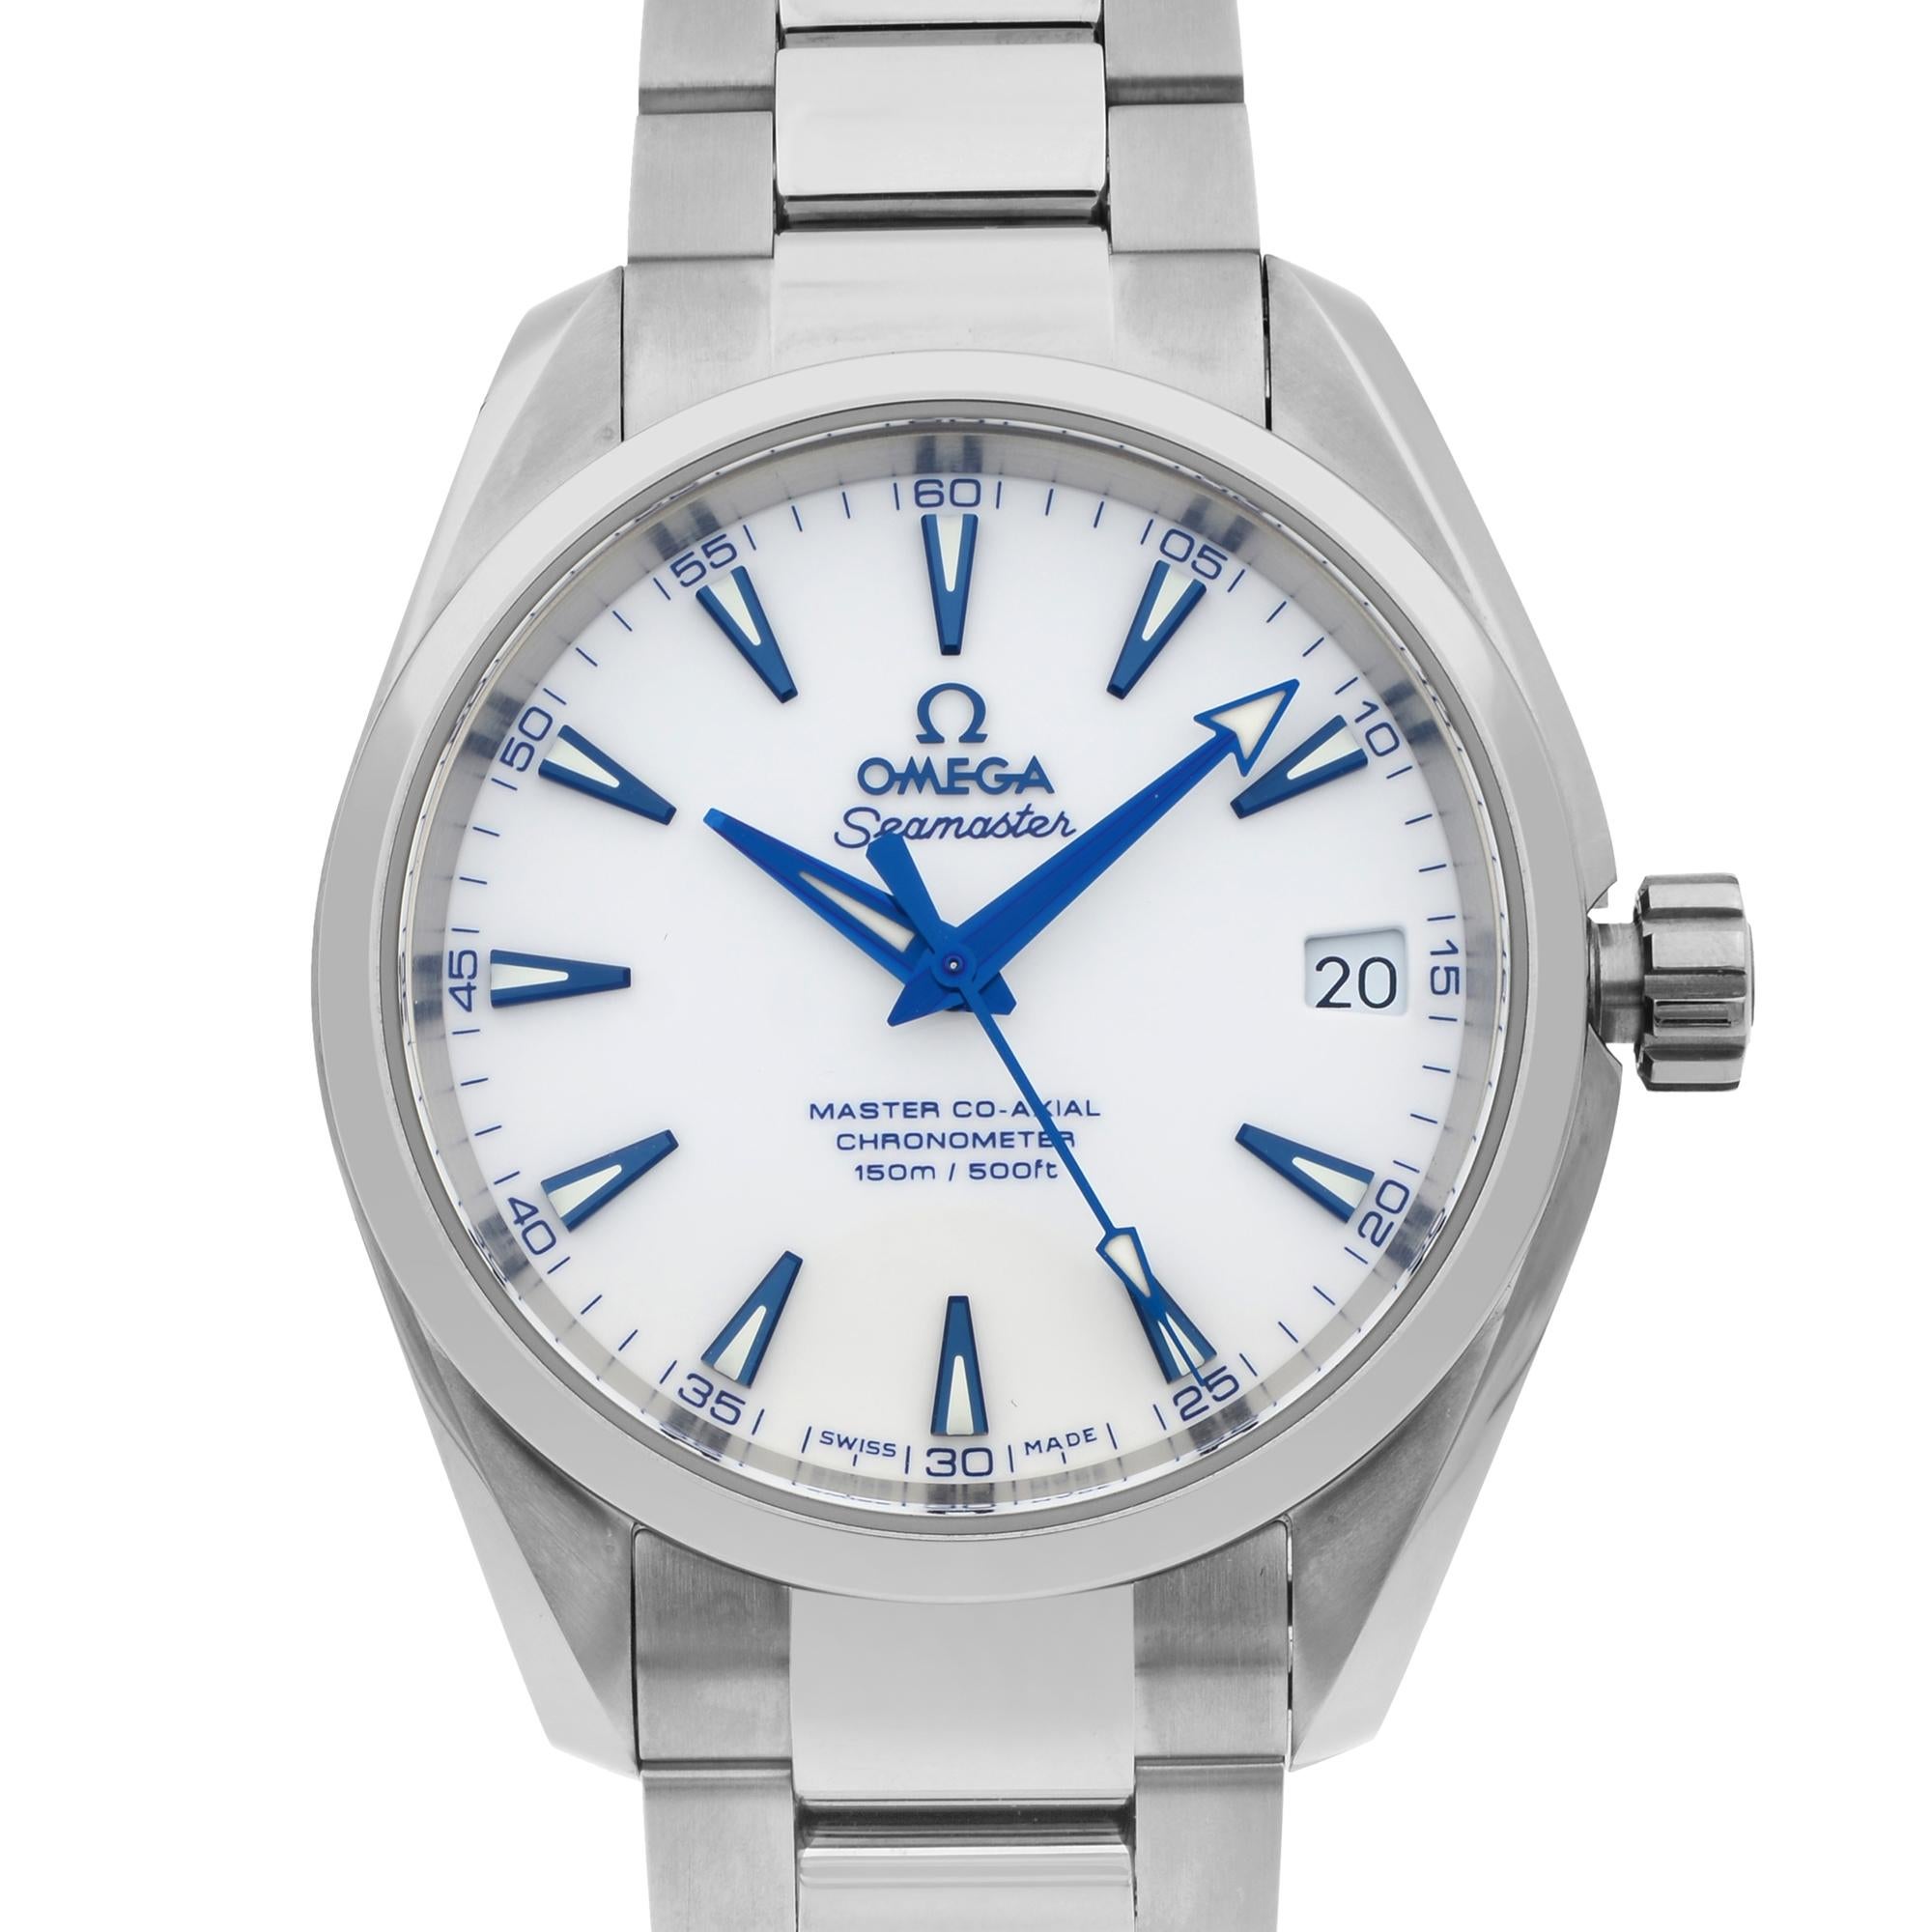 This brand new Omega Seamaster 231.90.39.21.04.001 is a beautiful men's timepiece that is powered by a mechanical (automatic) movement which is cased in a titanium case. It has a round shape face, date indicator dial, and has hand sticks style